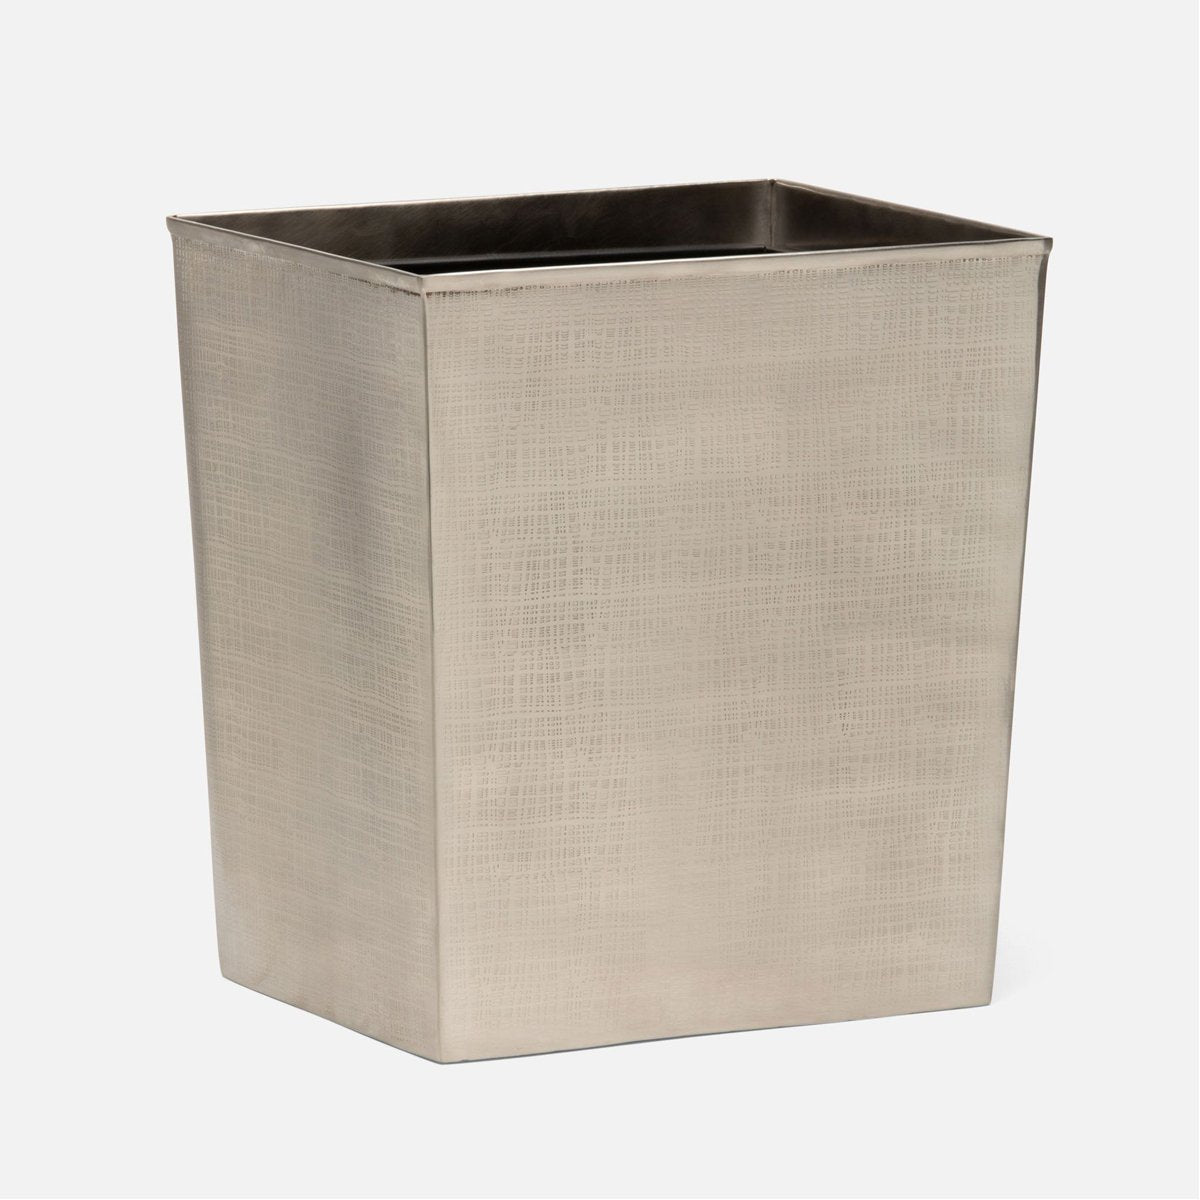 Pigeon and Poodle Remy Rectangular Wastebasket, Tapered